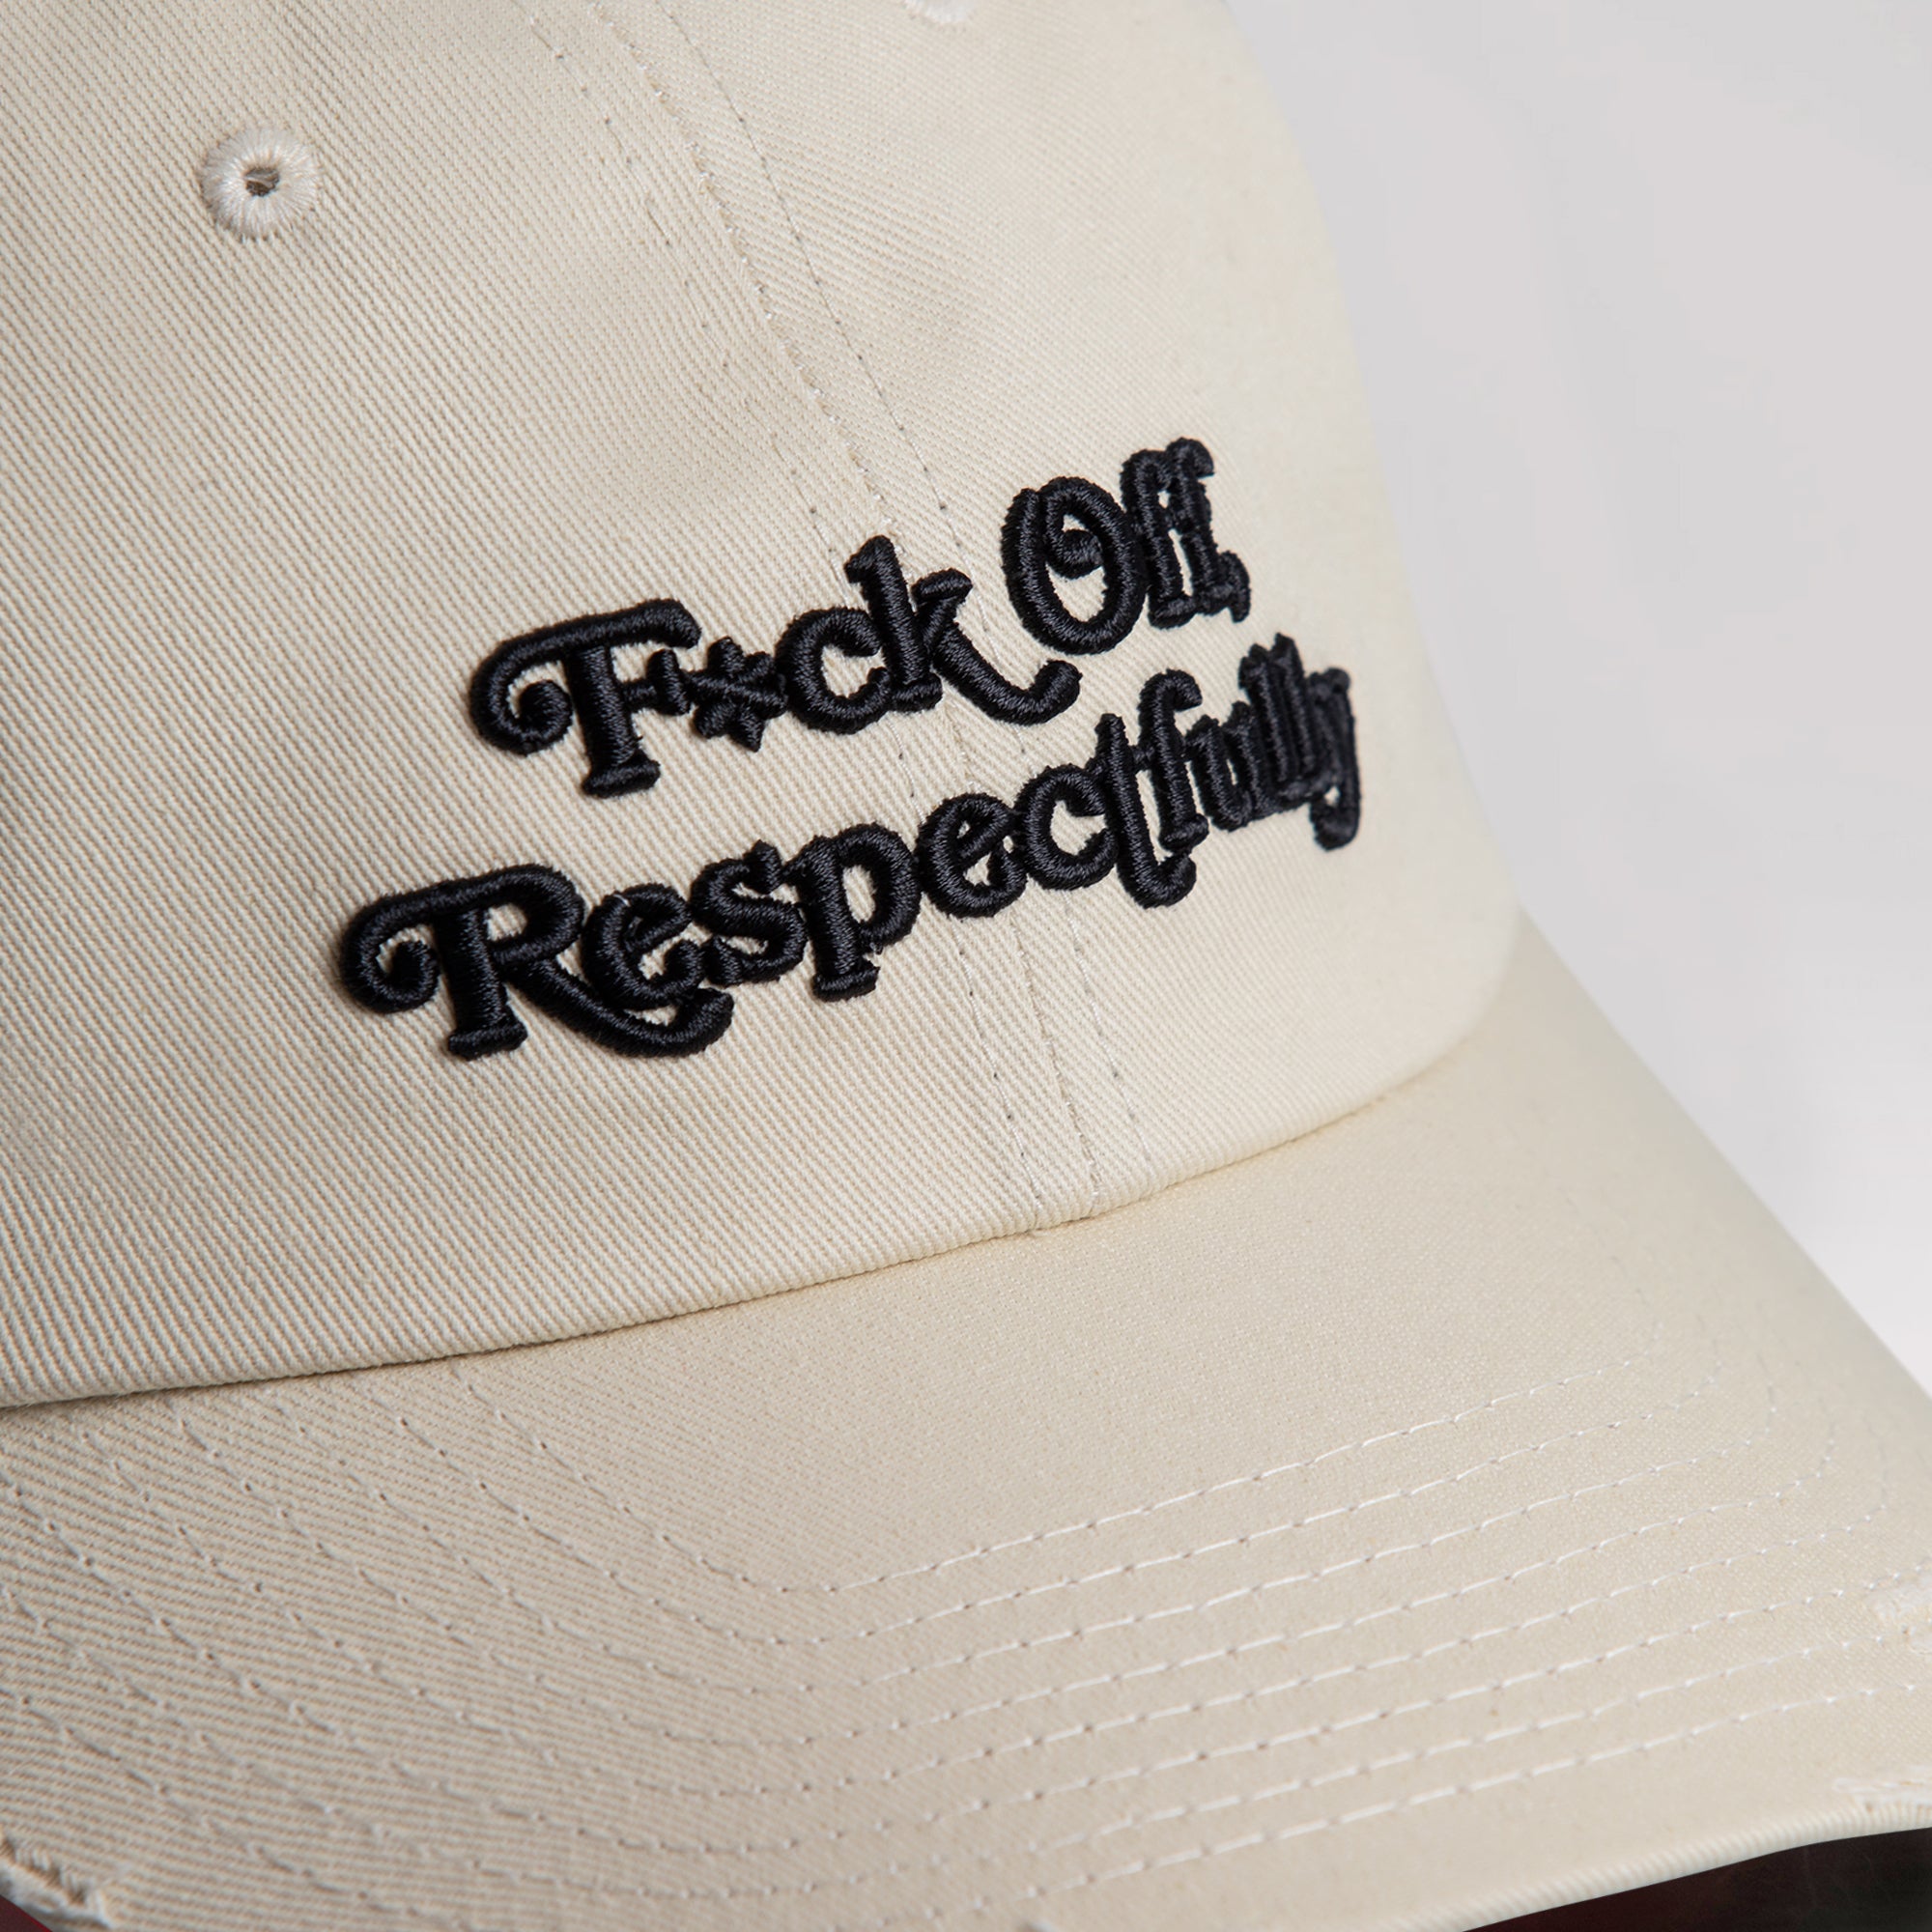 RESPECTFULLY SAND DISTRESSED RELAXED FIT HAT